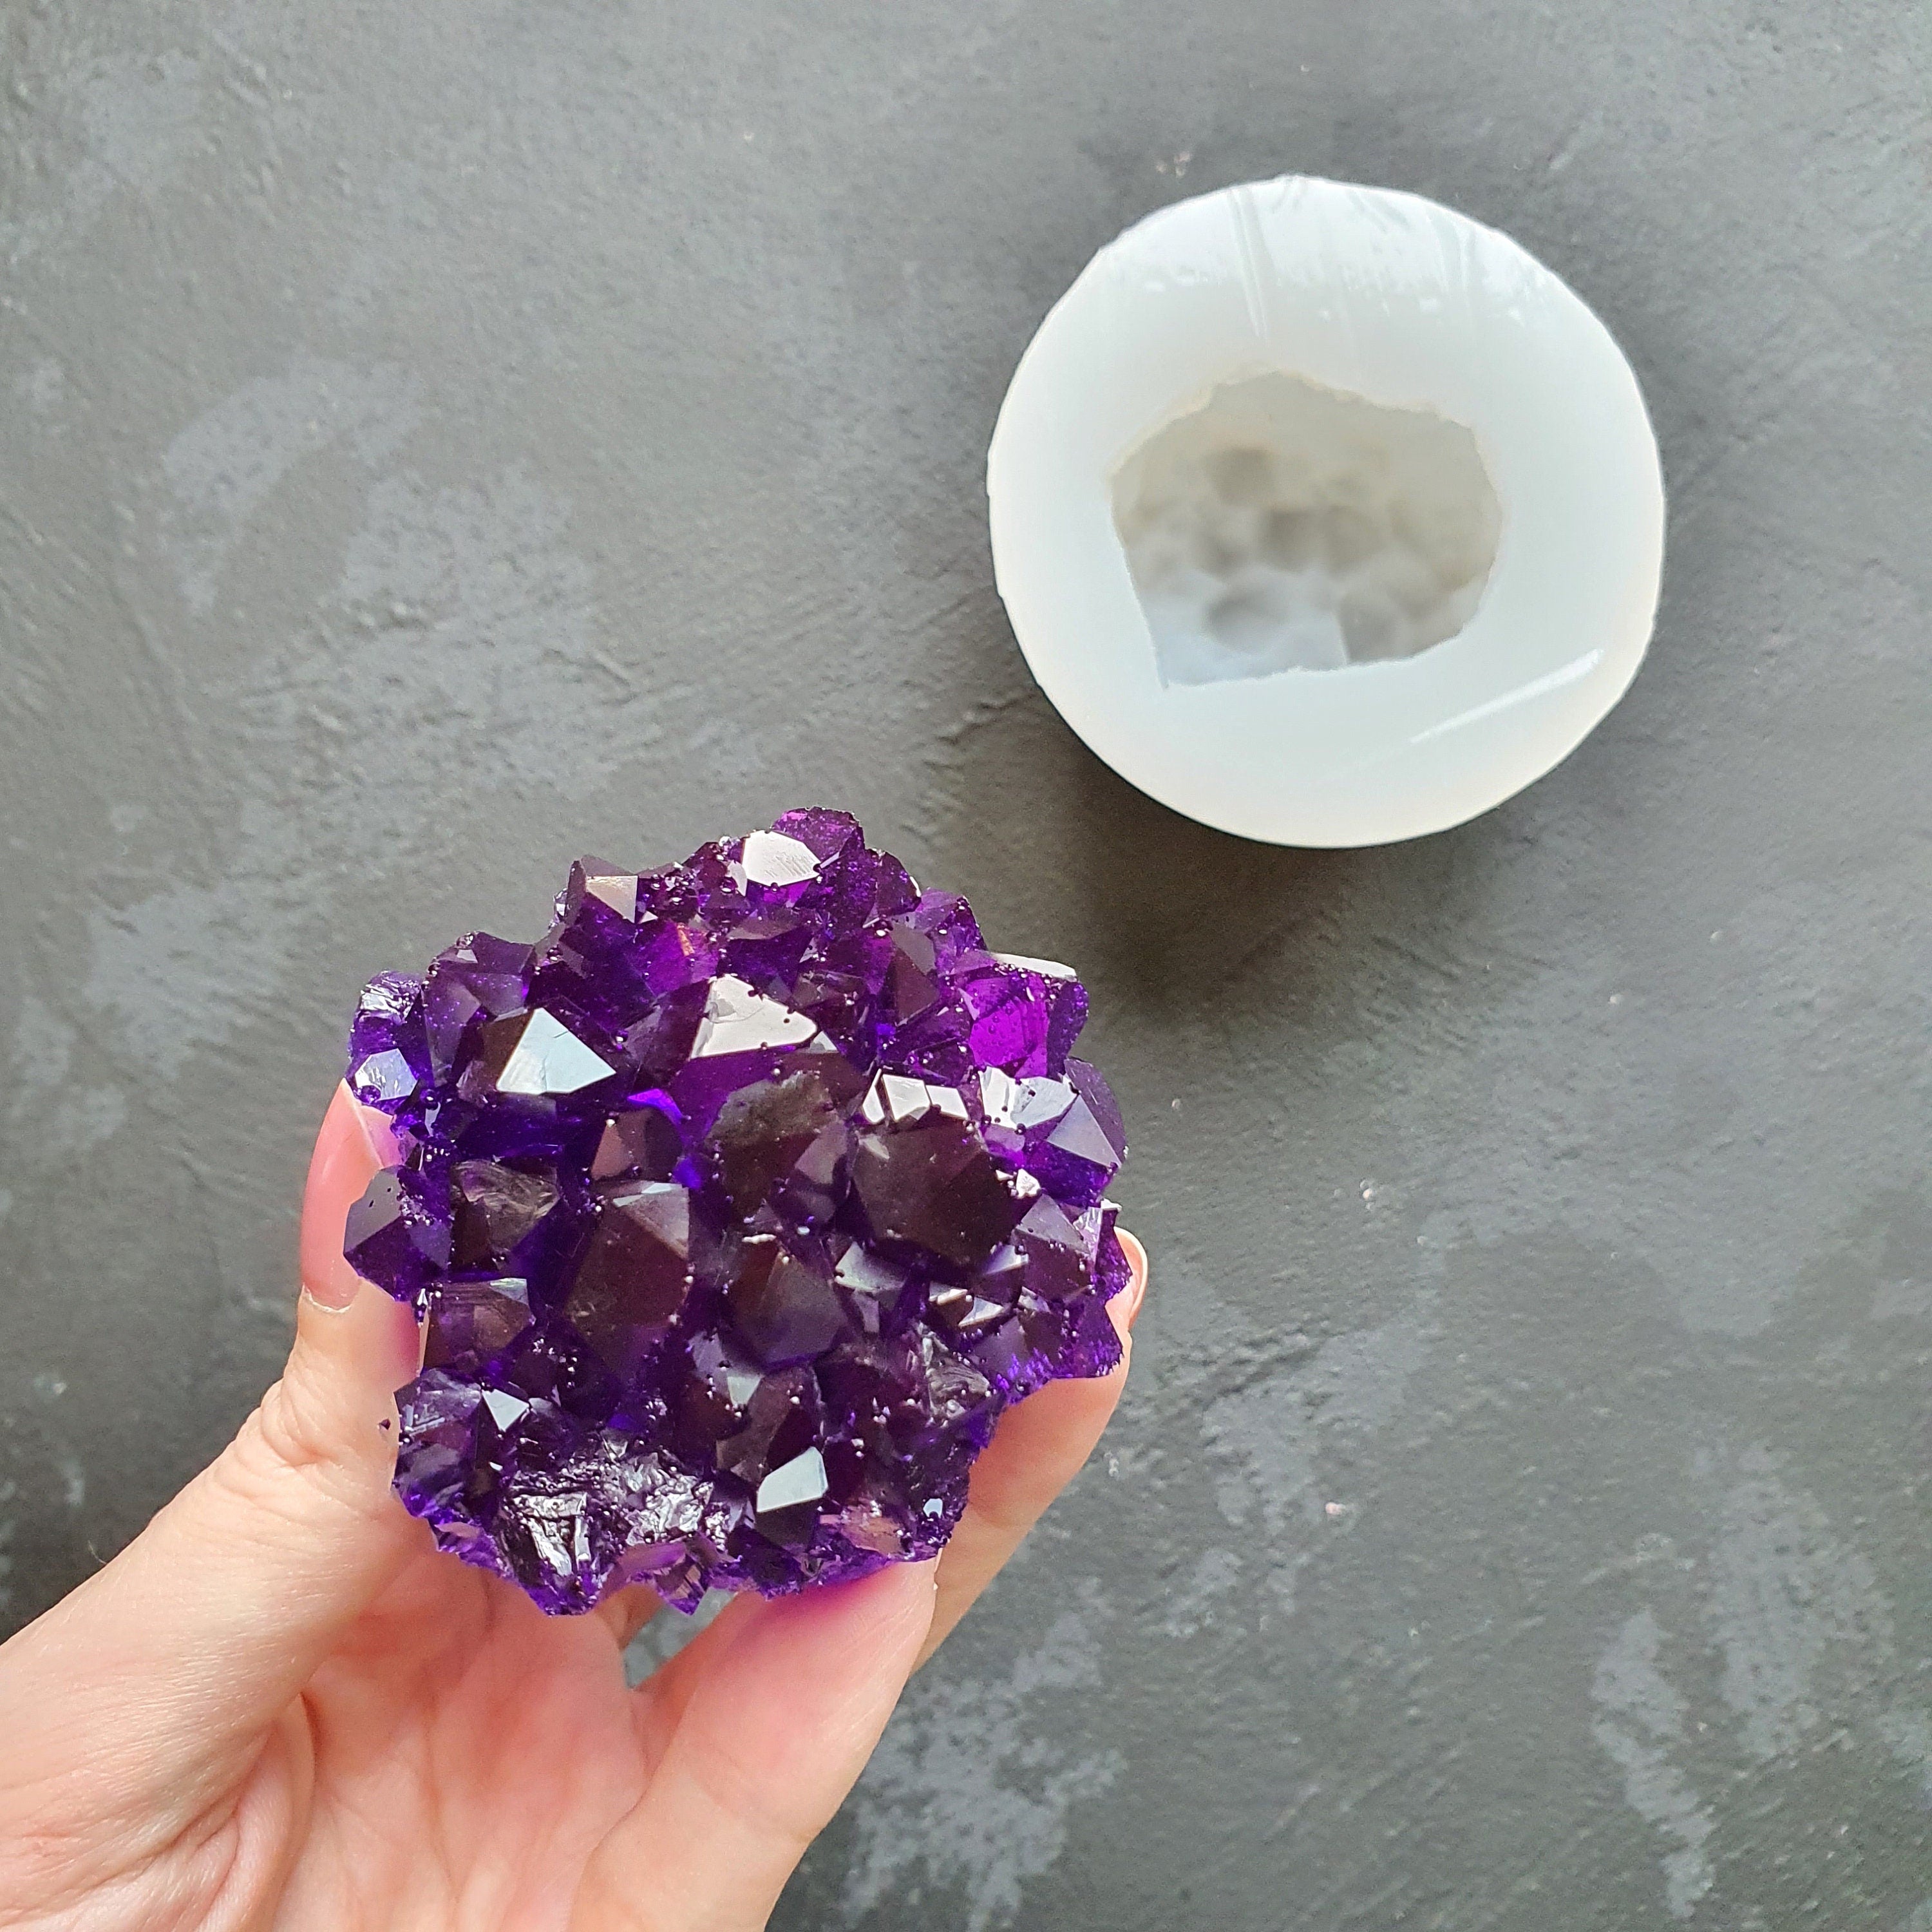 Best Epoxy Resin Mold, 7 Beautiful Crystal Mold Designs, Amethyst, Cry –  SBC Decorative Concrete Training and Products ™